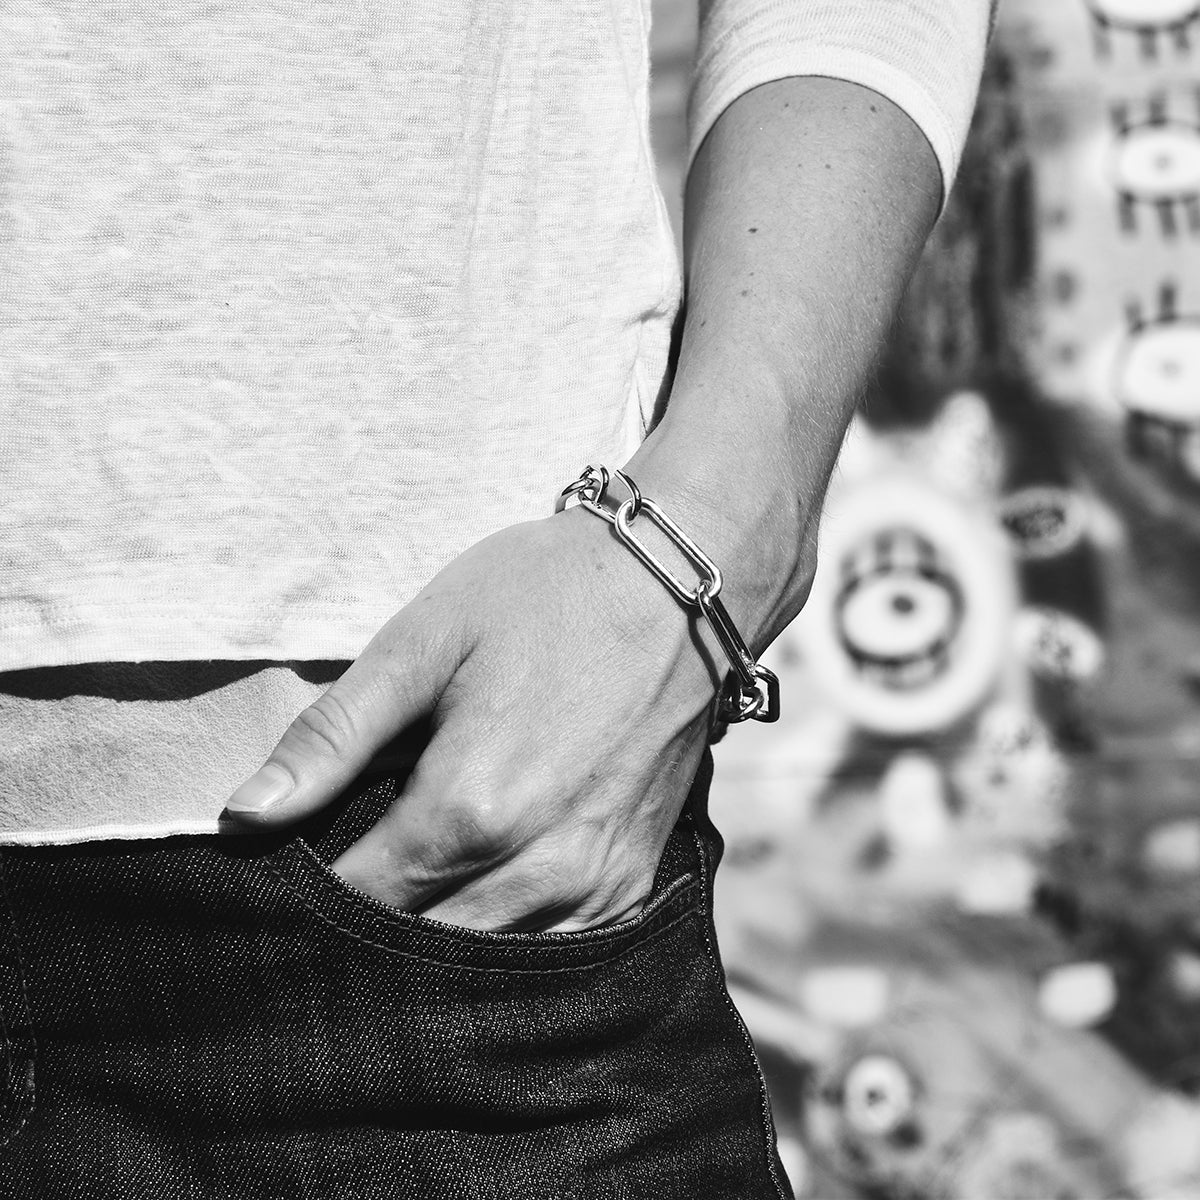 Eliza link bracelet on a model for scale. Elongated Sterling silver links and a handmade clasp lend an edgy, NYC vibe.